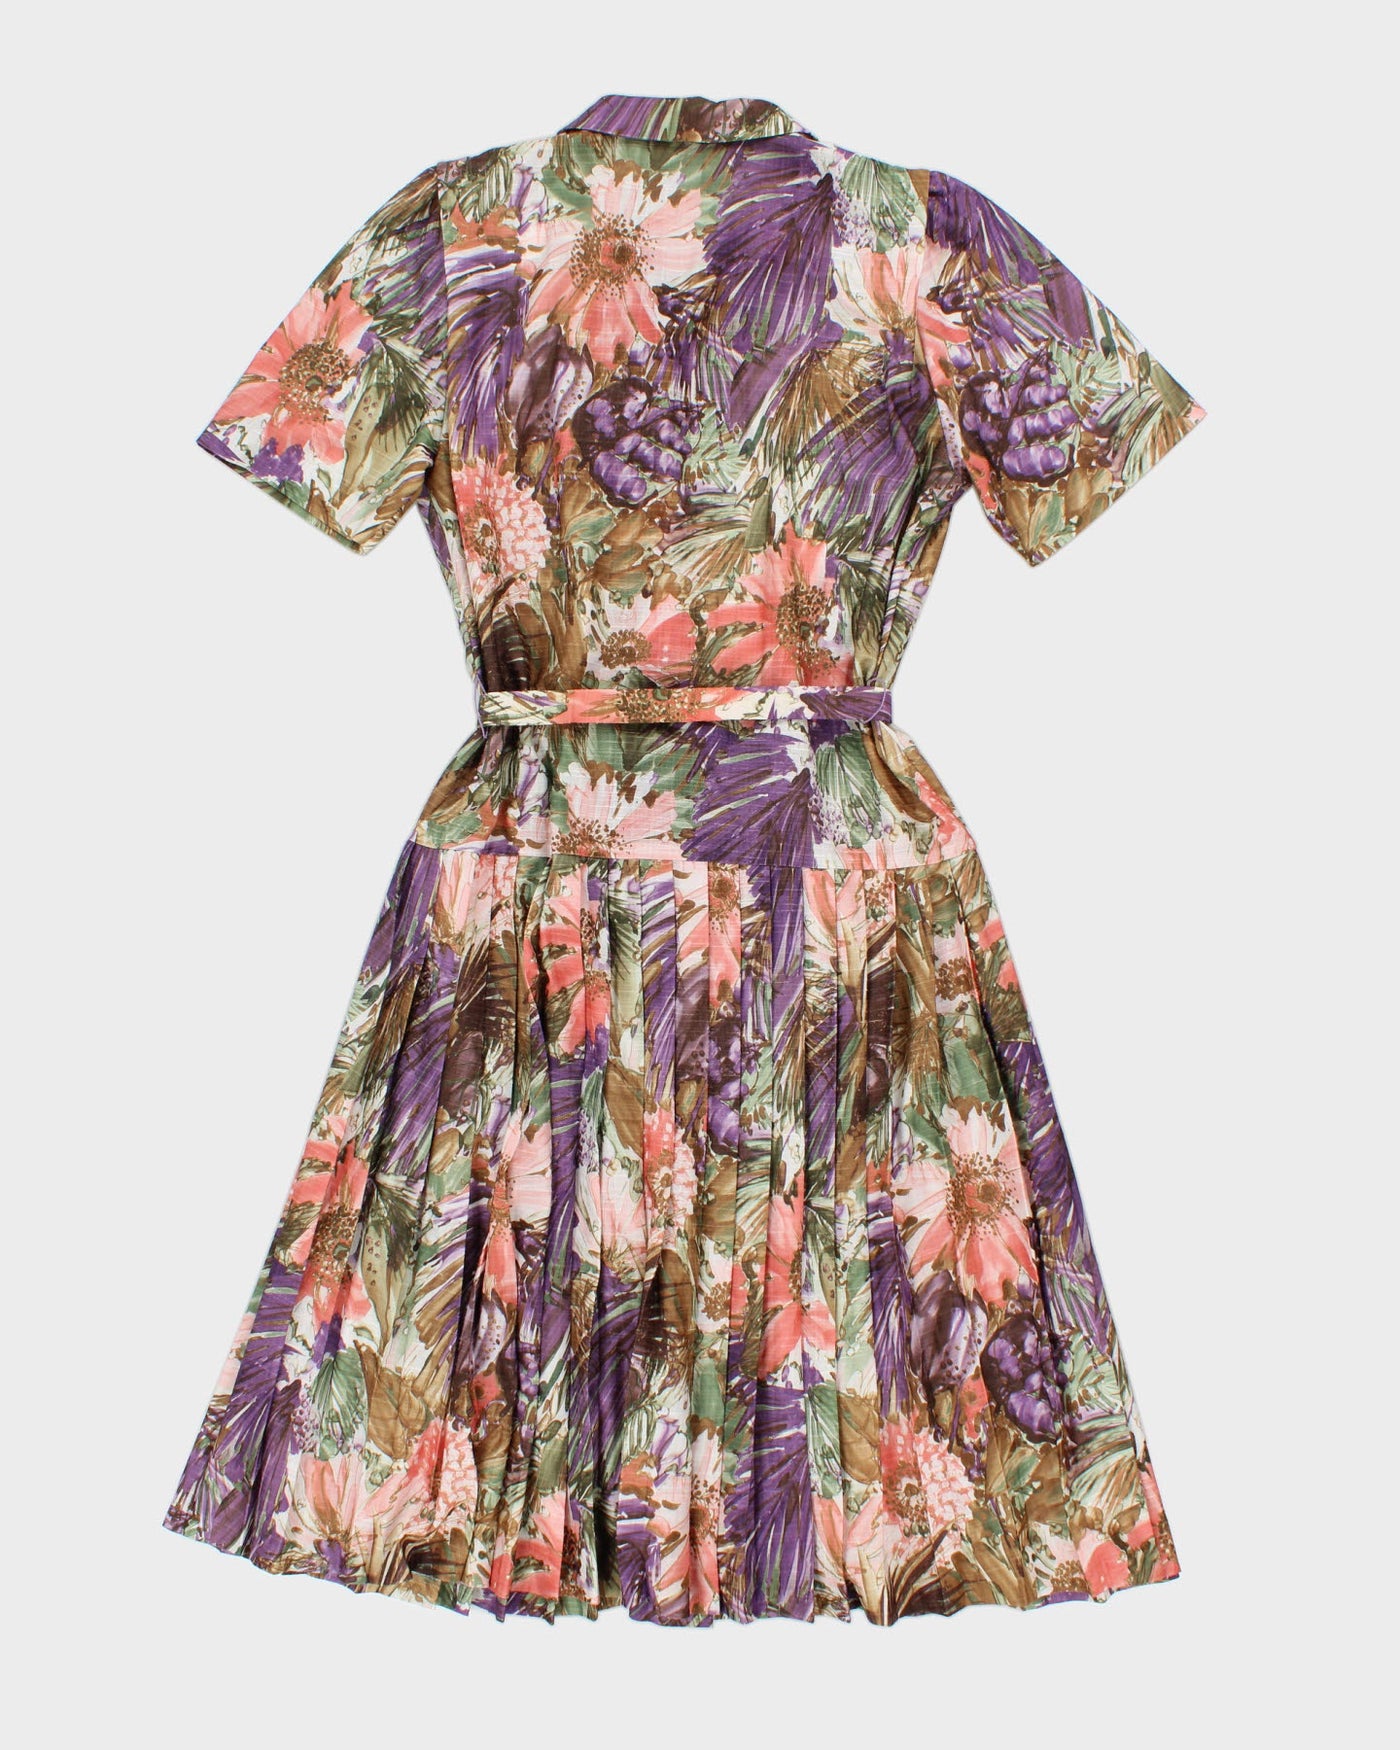 Vintage Handmade Floral Pleated Button-Up Dress - L